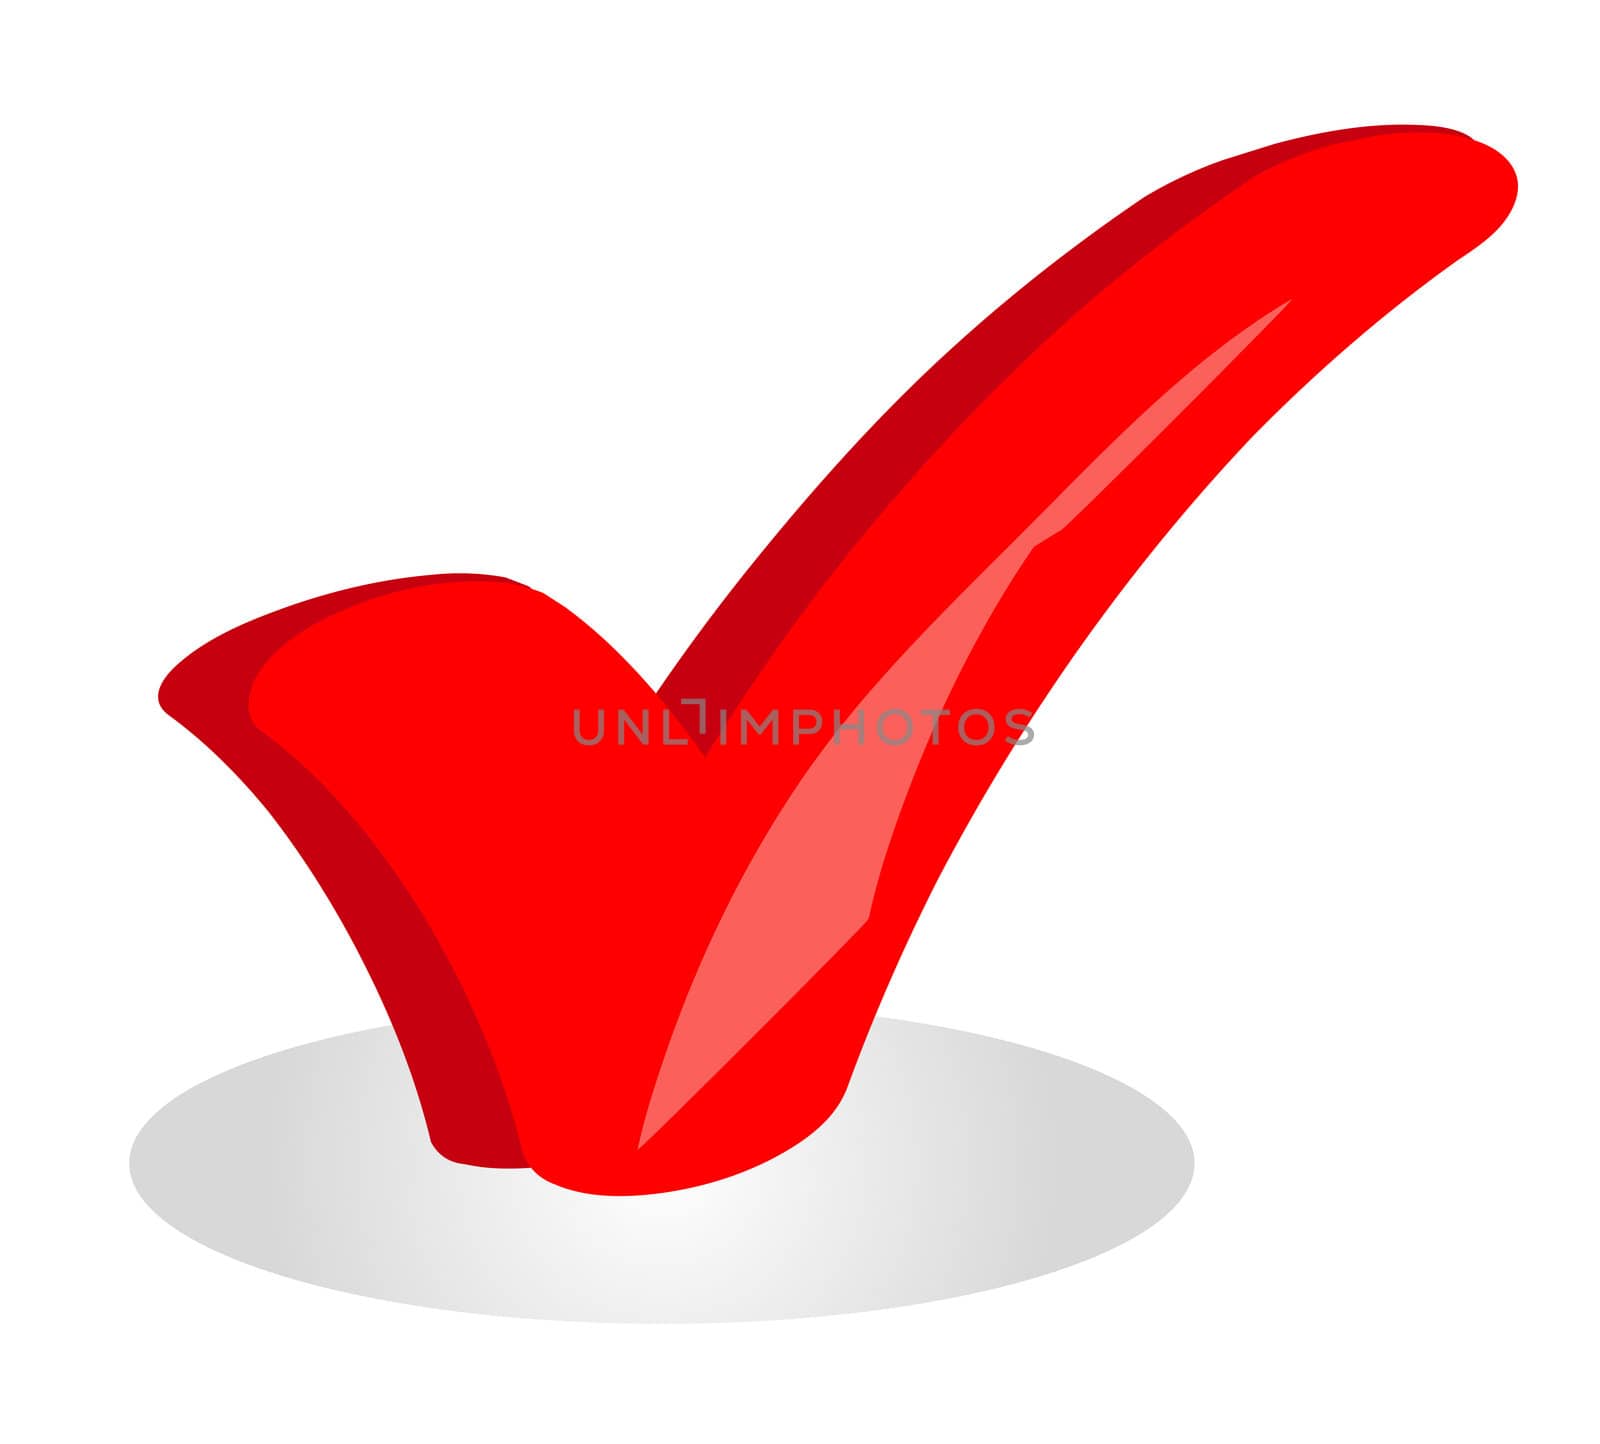 A red checkmark. All isolated on a plain white background.